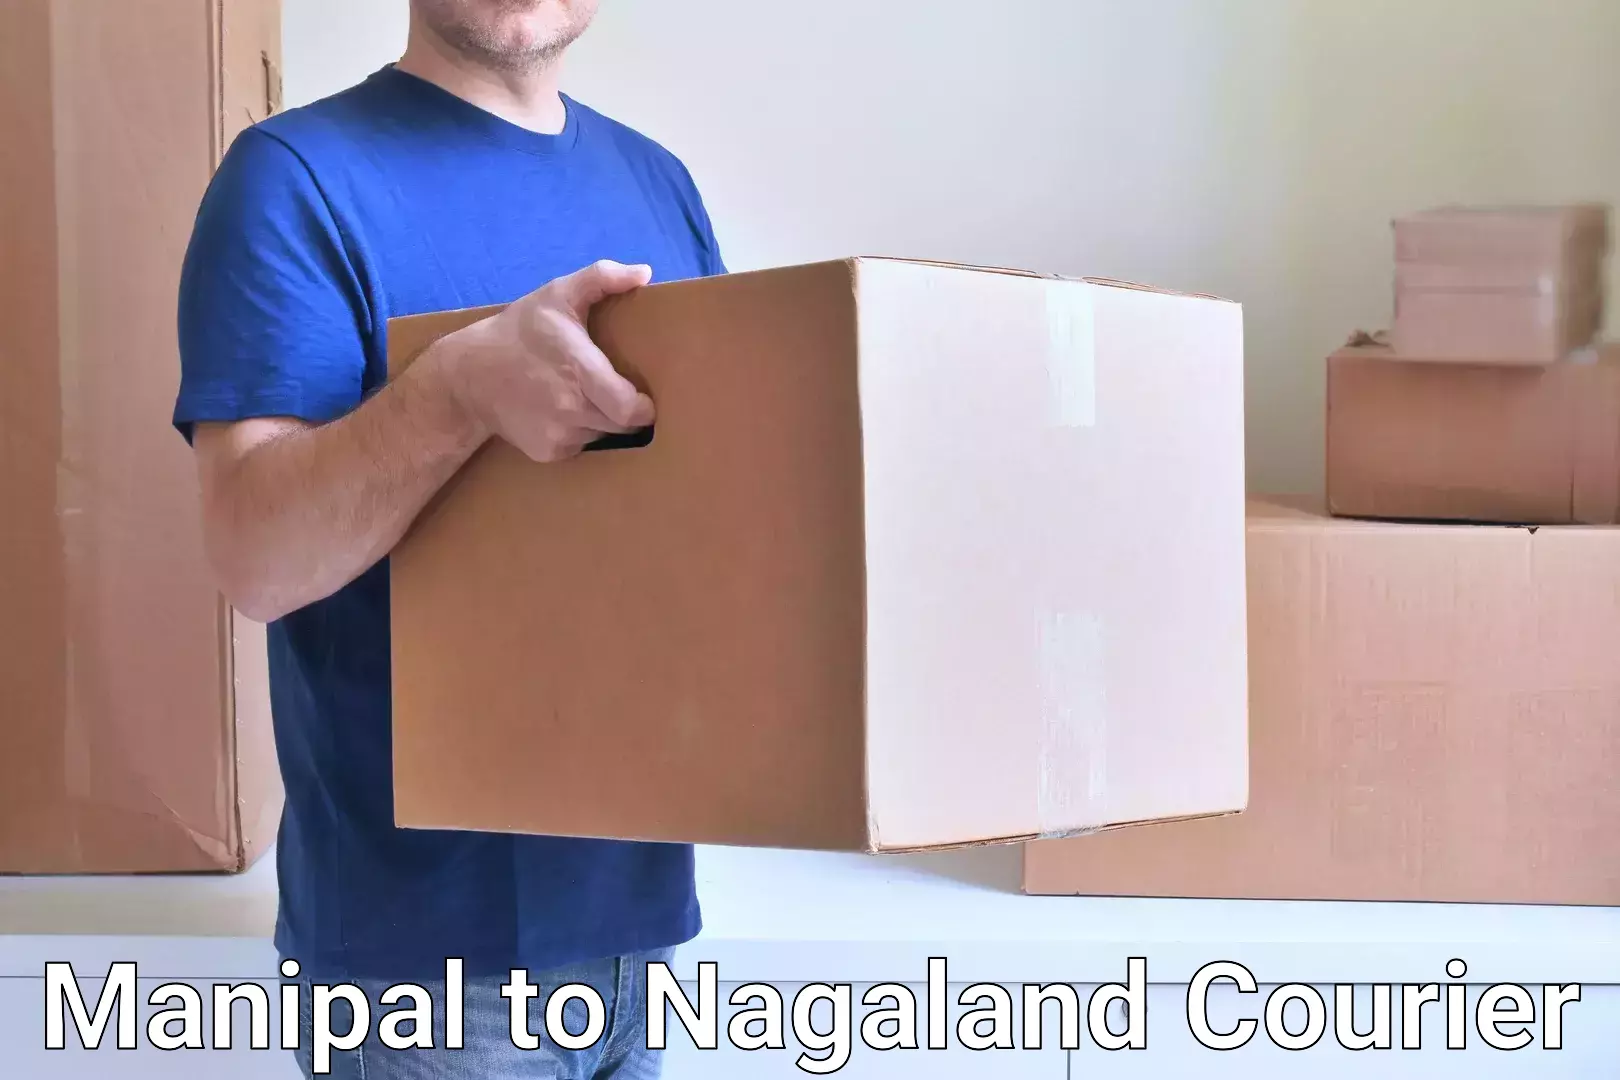 24/7 courier service in Manipal to Nagaland